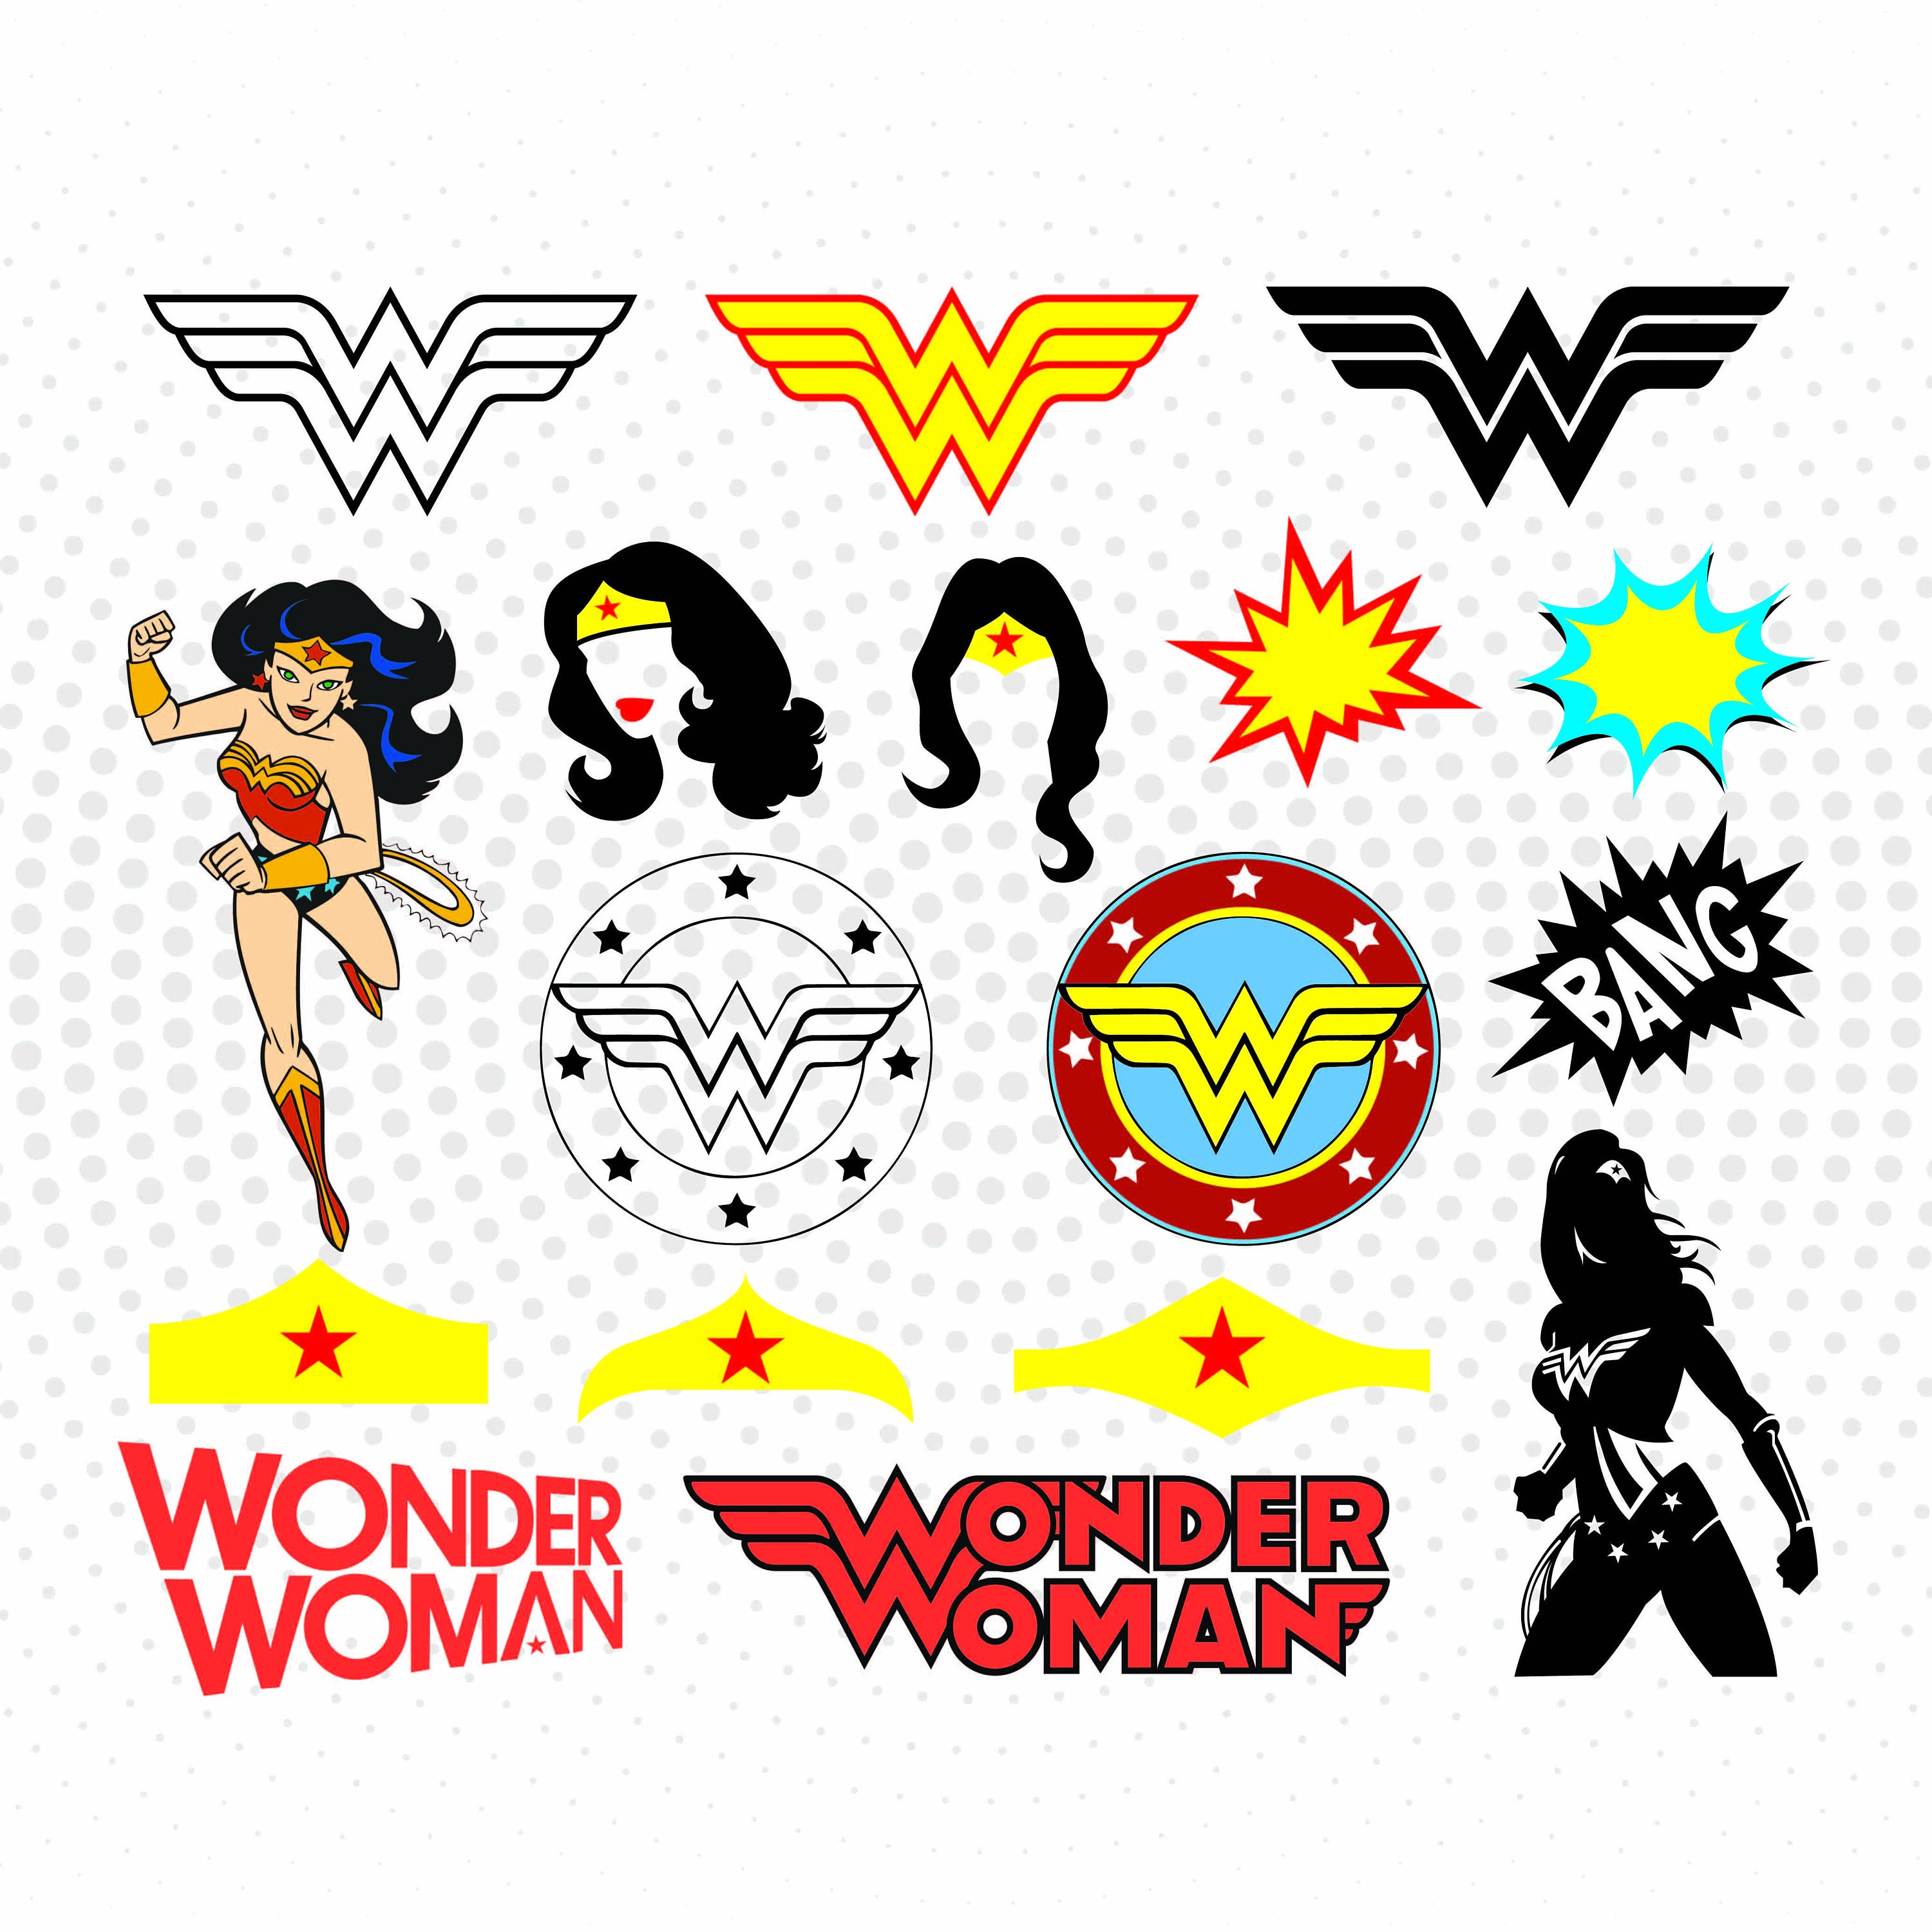 Wonder Woman SVG PNG DXF for Cut files Cricut Silhouettes | Etsy